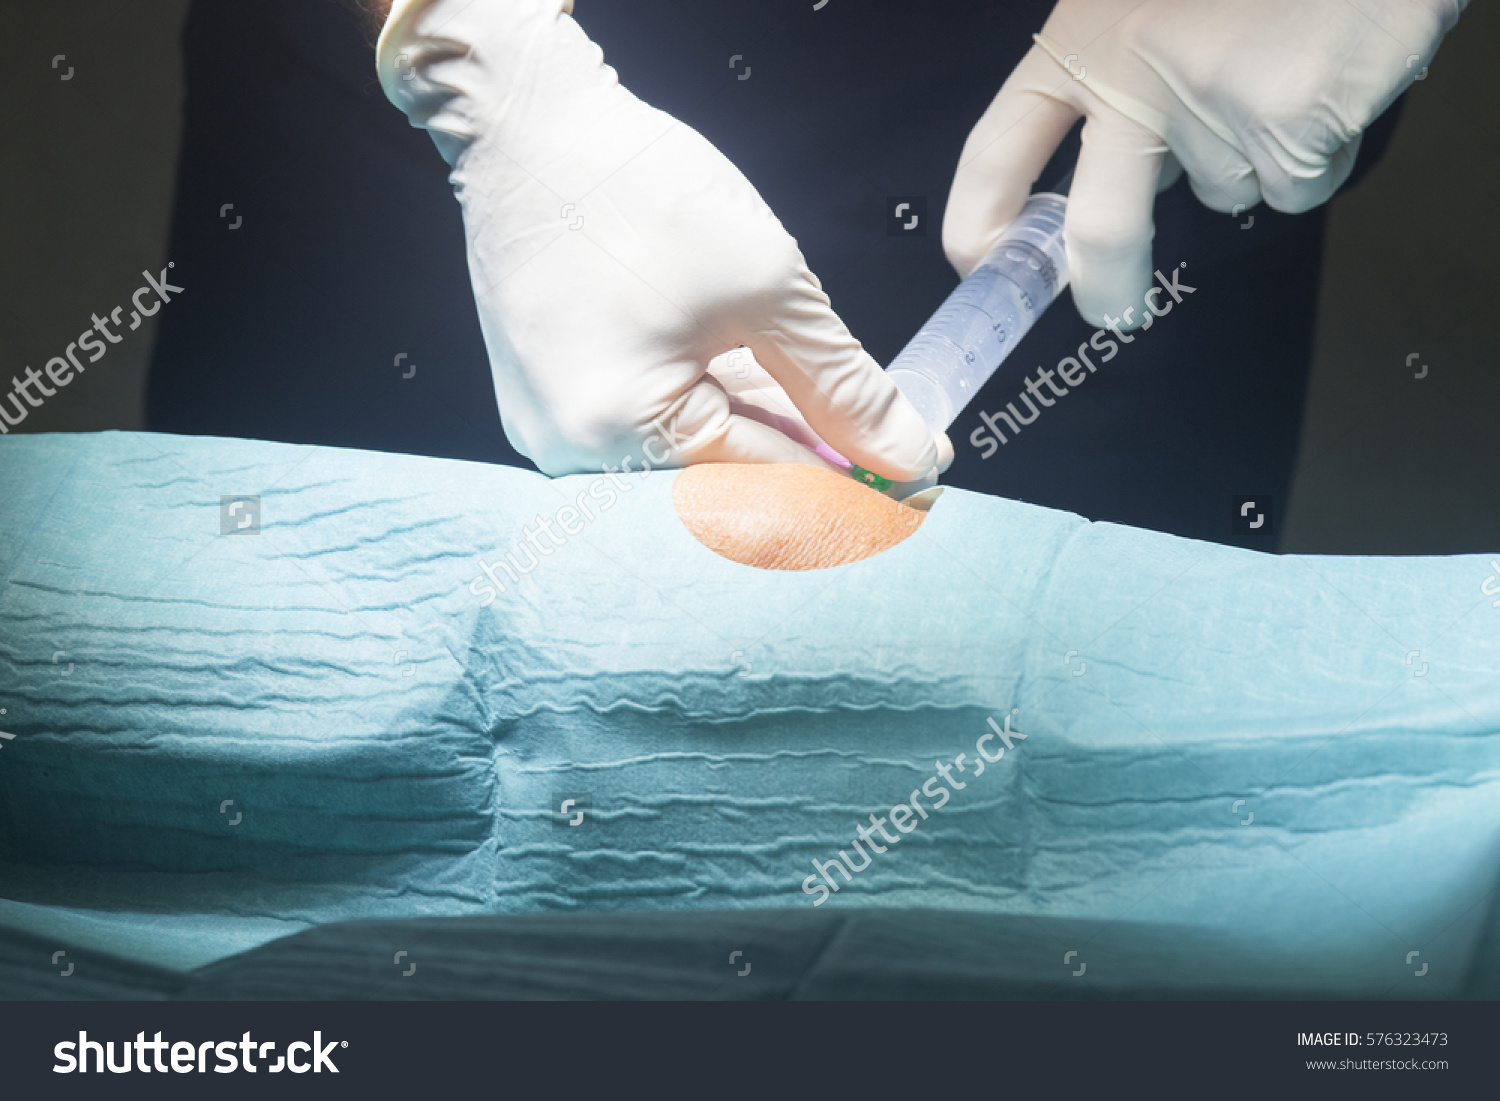 stock-photo-anaesthtist-anaesthetic-injection-in-knee-for-surgery-hospital-operation-medical-procedure-in-576323473